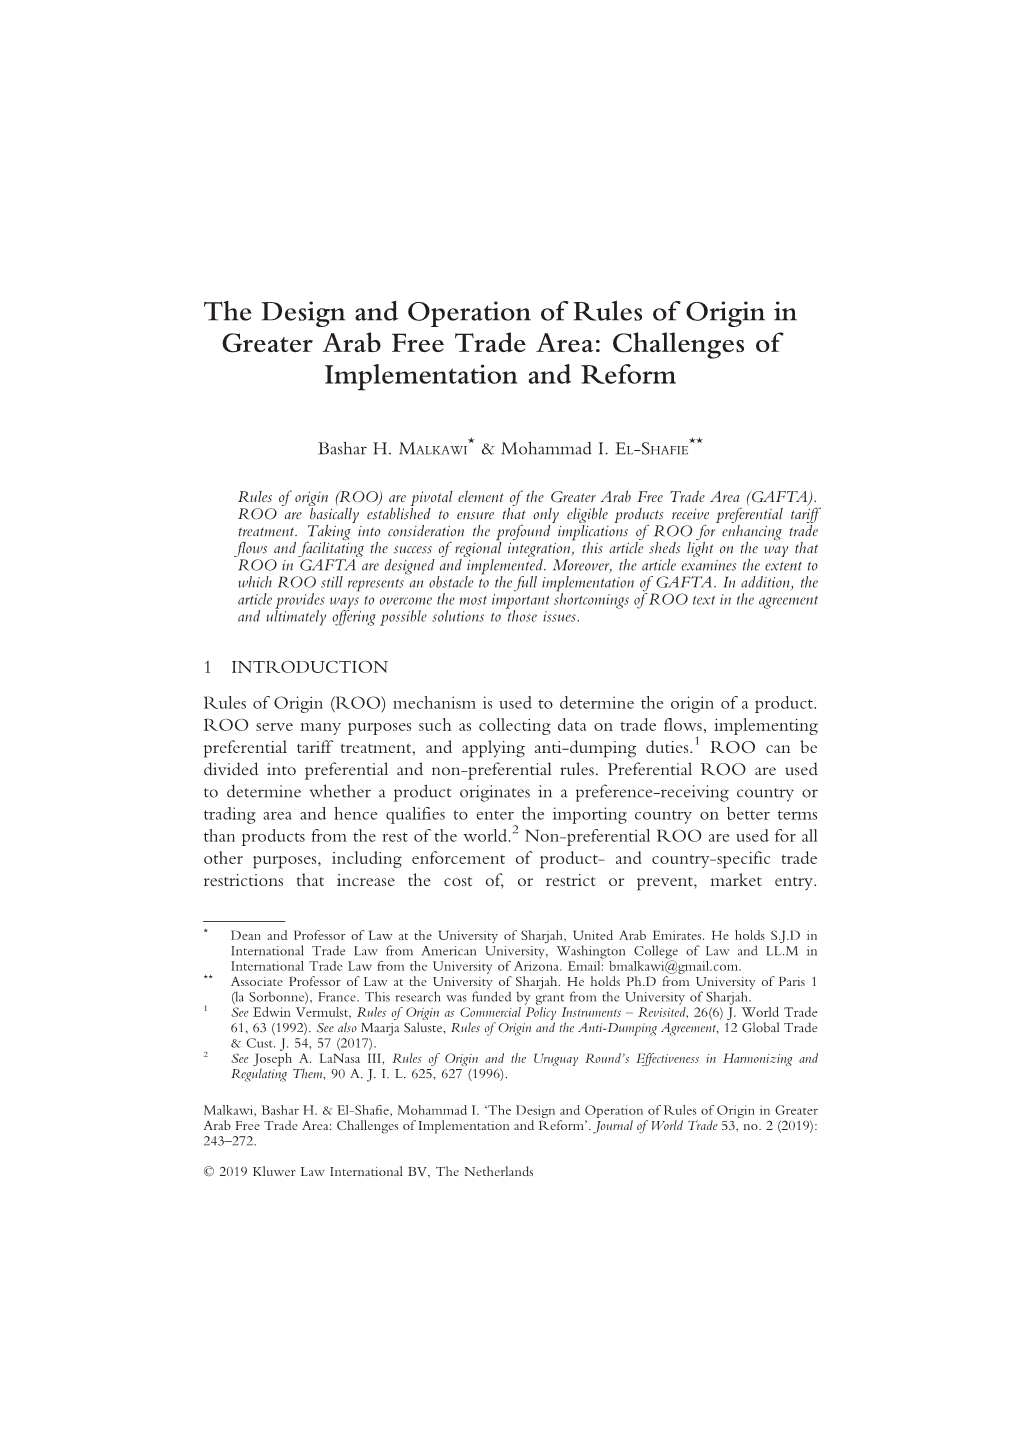 The Design and Operation of Rules of Origin in Greater Arab Free Trade Area: Challenges of Implementation and Reform